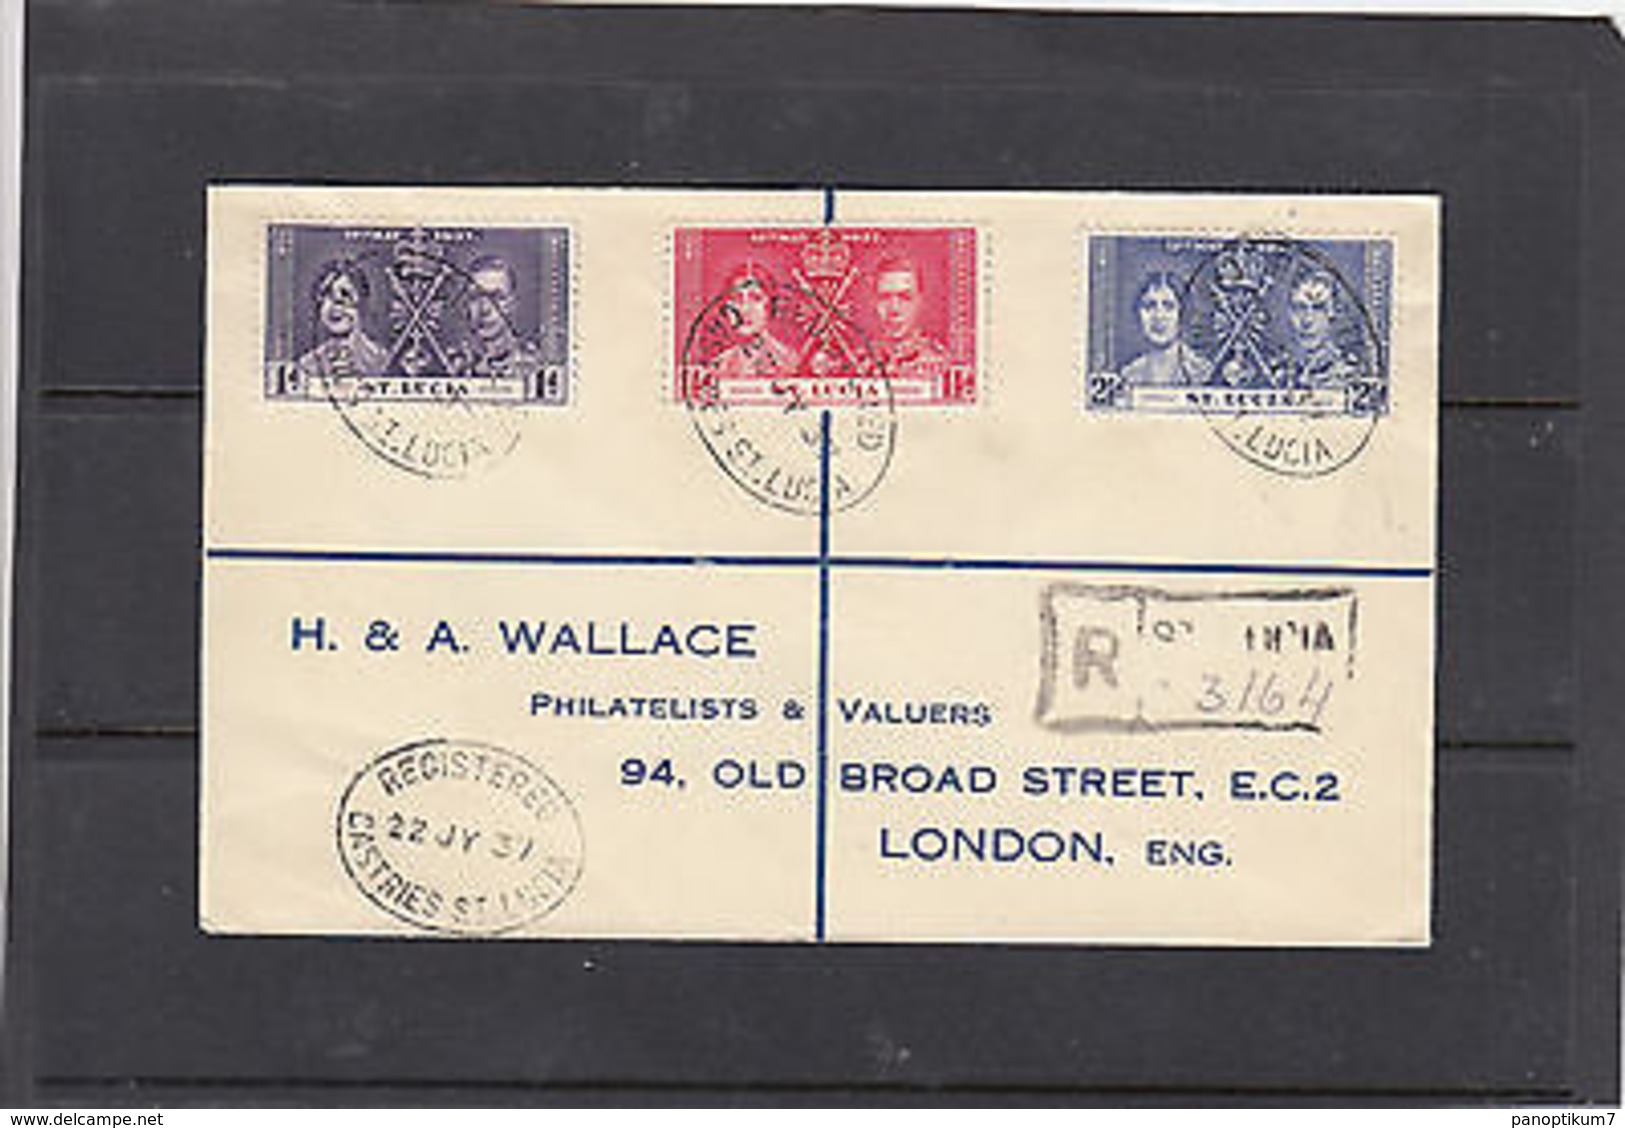 St.LUCIA 1937,Registered Cover With Coronation Set,arrival Cancel,very Good Cond - Ste Lucie (...-1978)